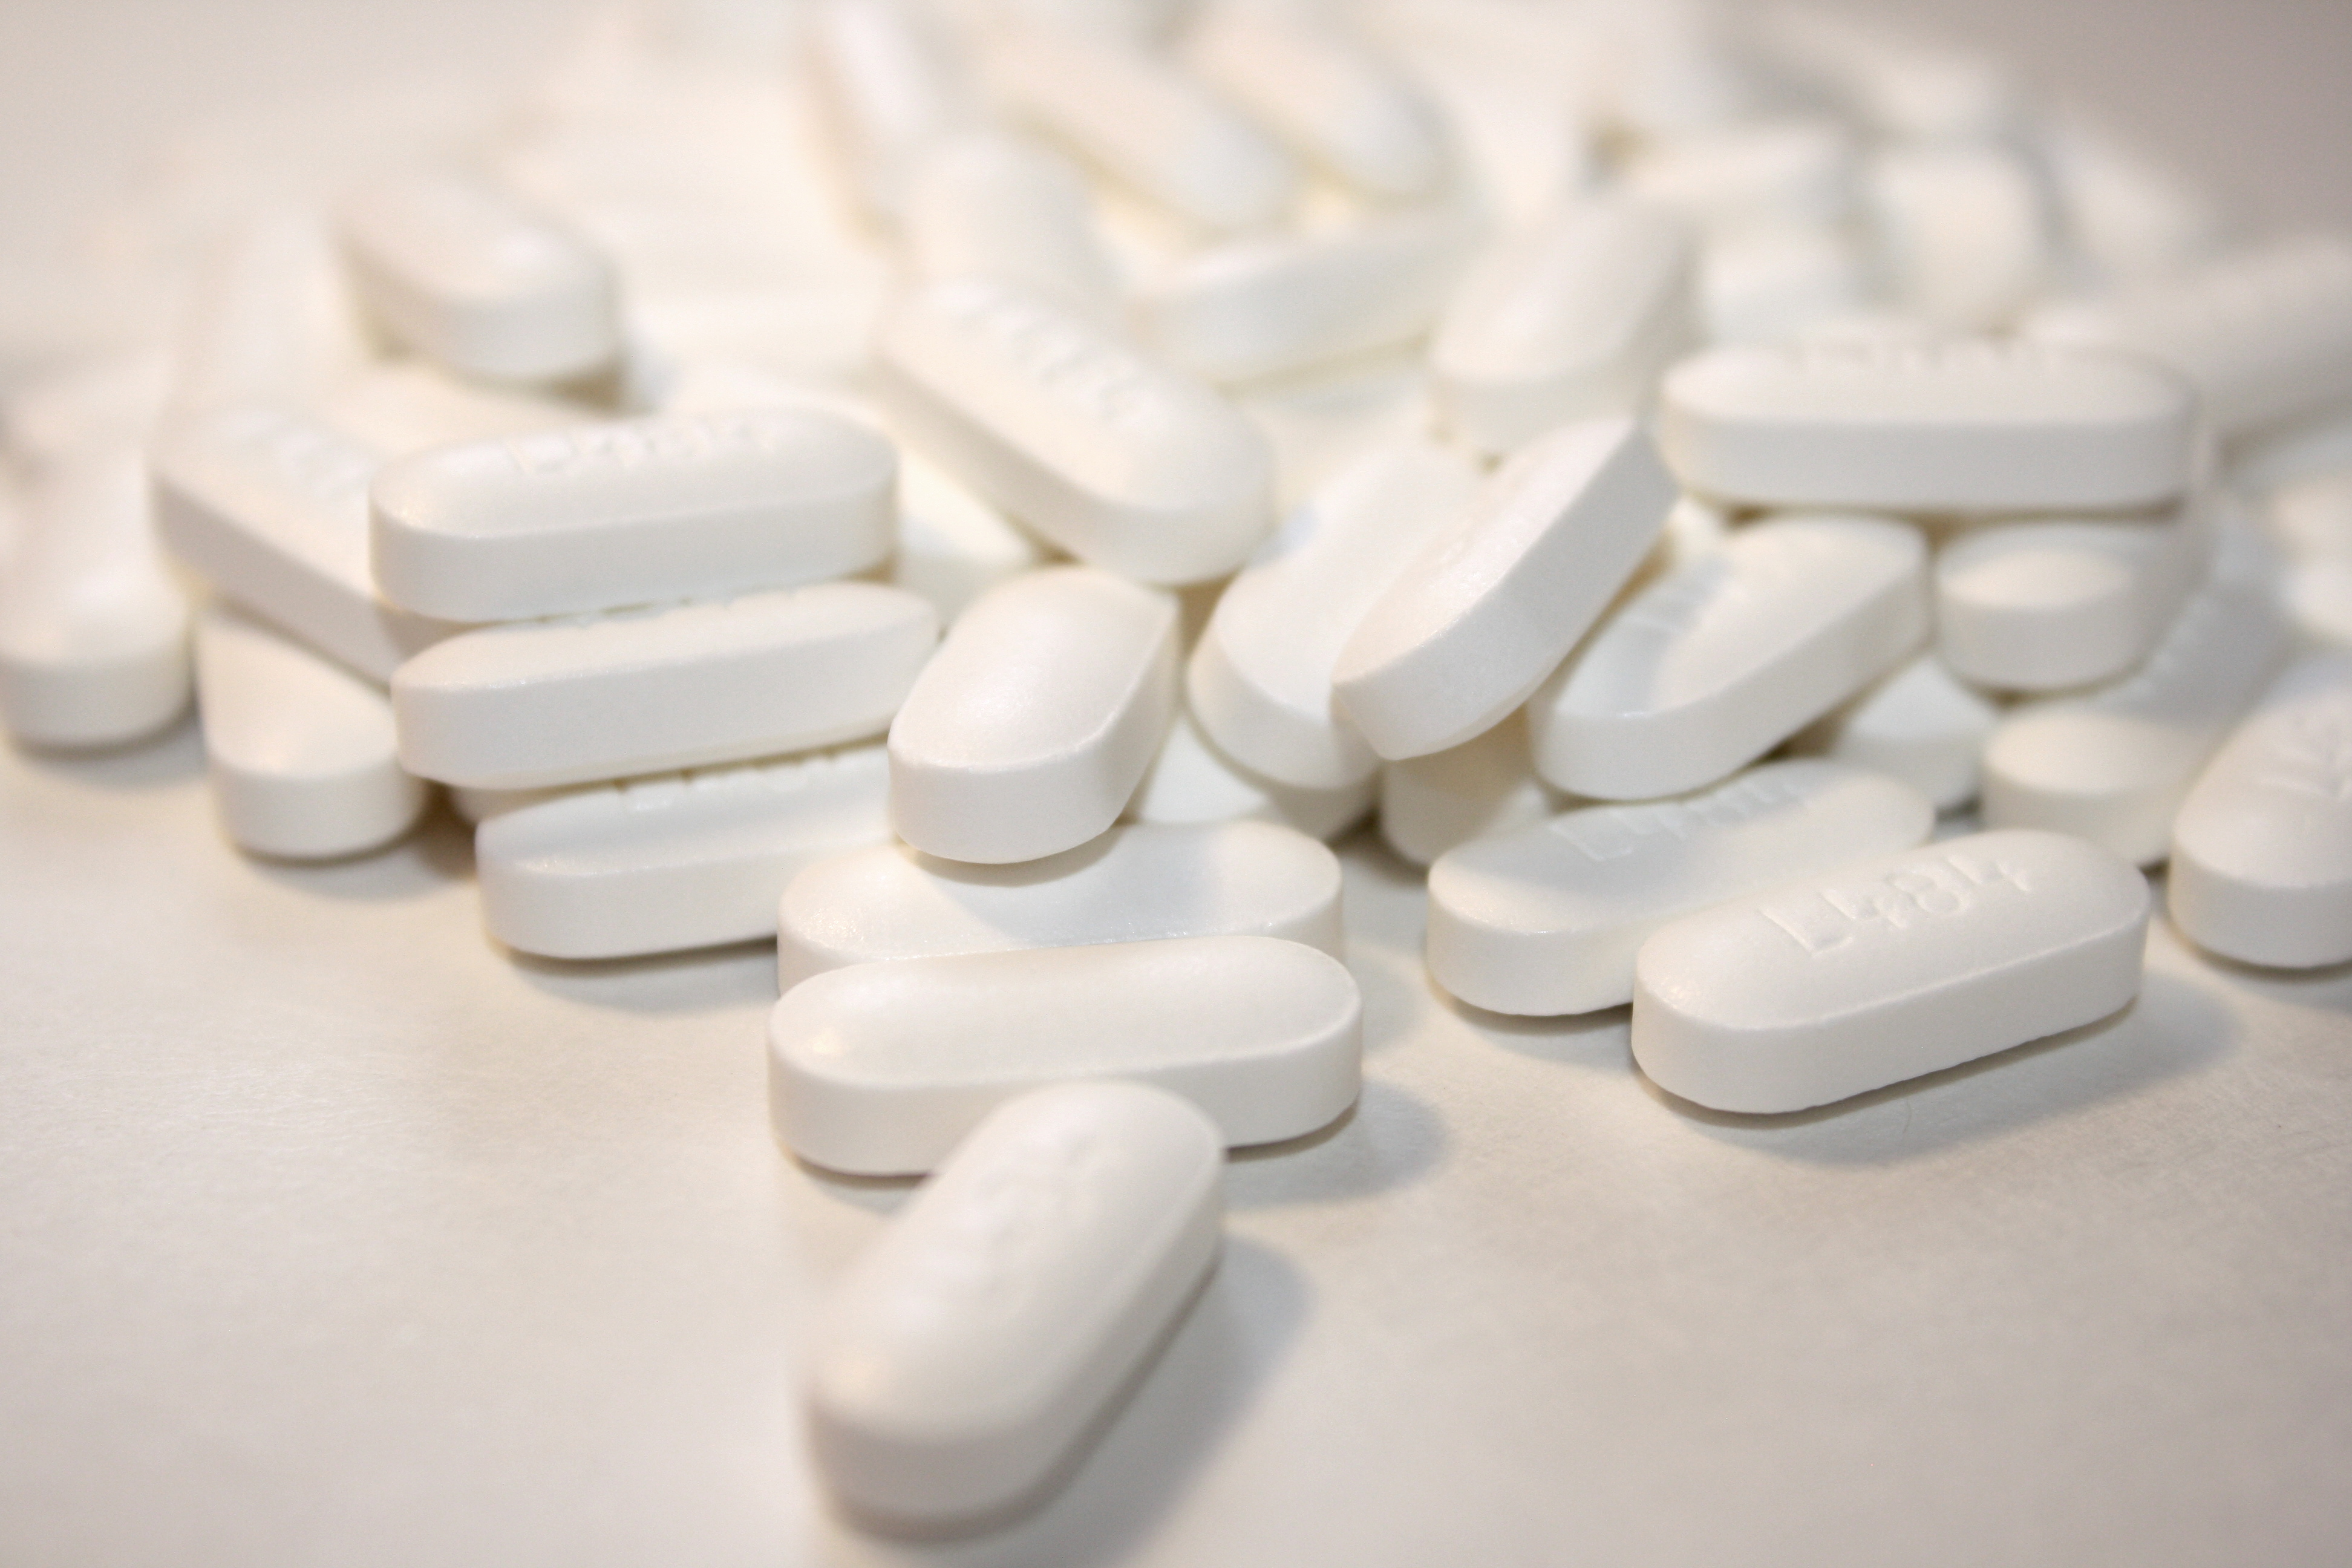 White Acetaminophen Pills or Caplets Picture | Free Photograph ...